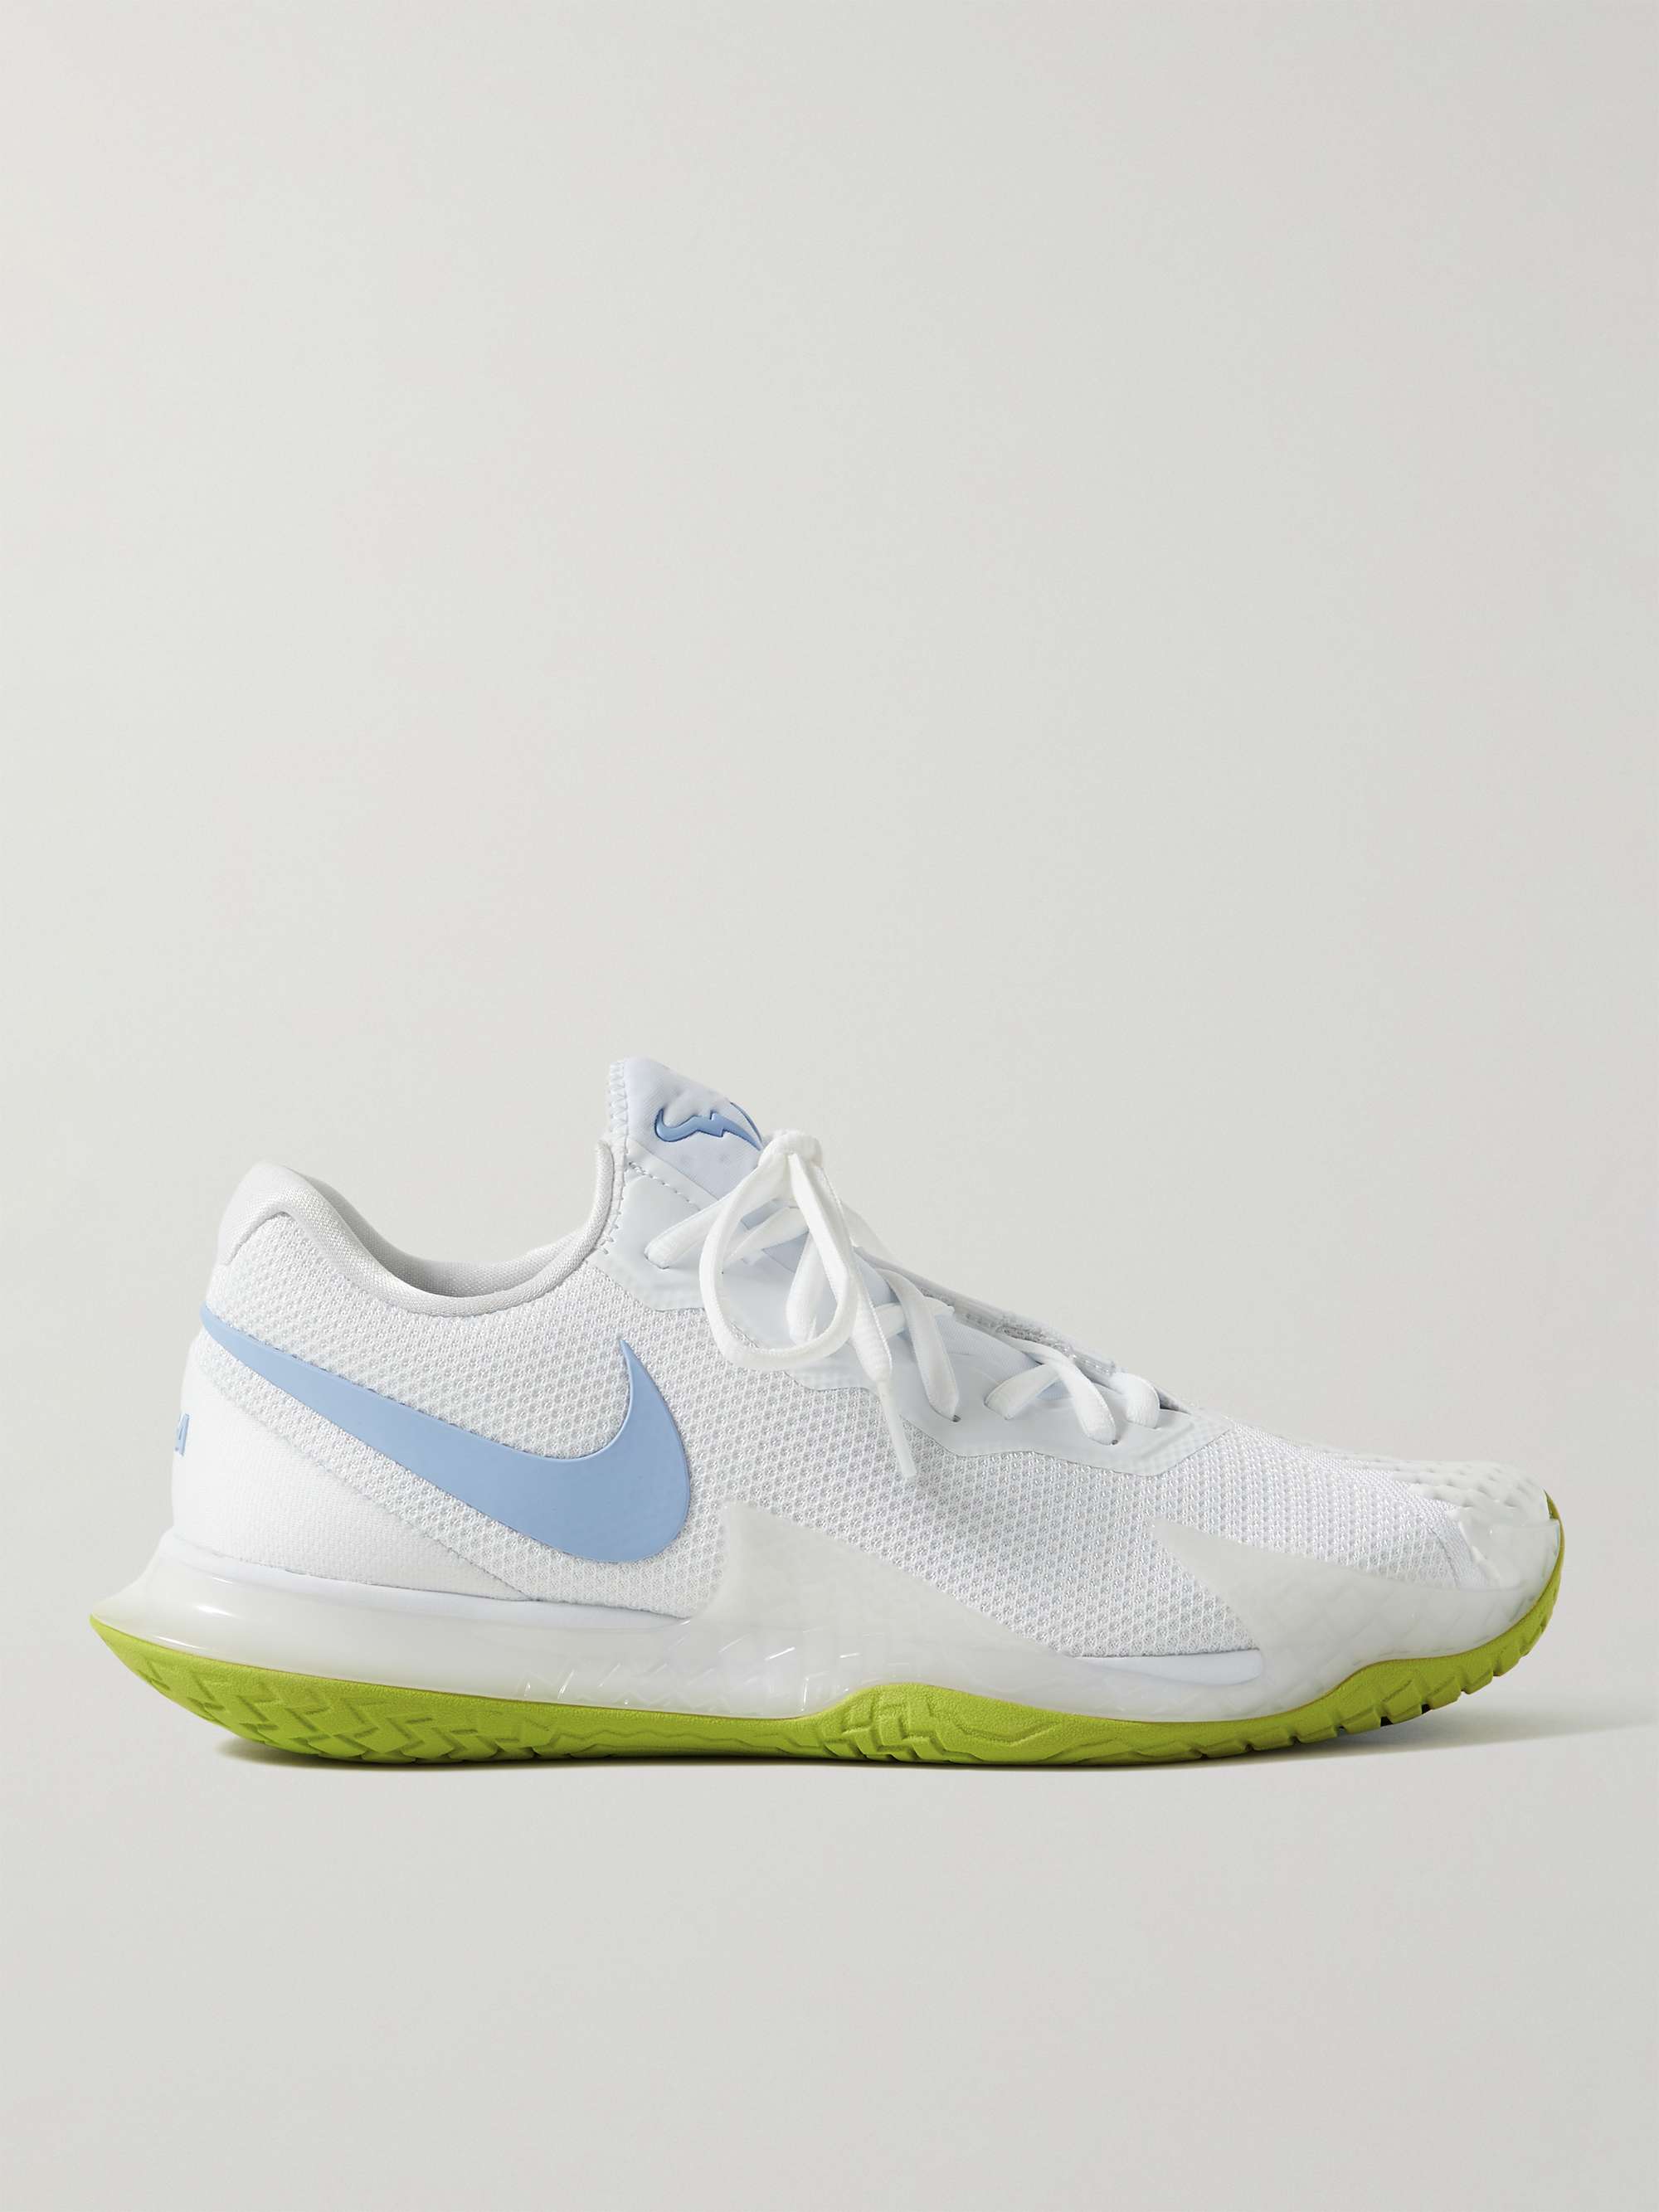 NIKE TENNIS NikeCourt Zoom Vapor Cage 4 Rubber and Mesh Tennis Sneakers |  MR PORTER